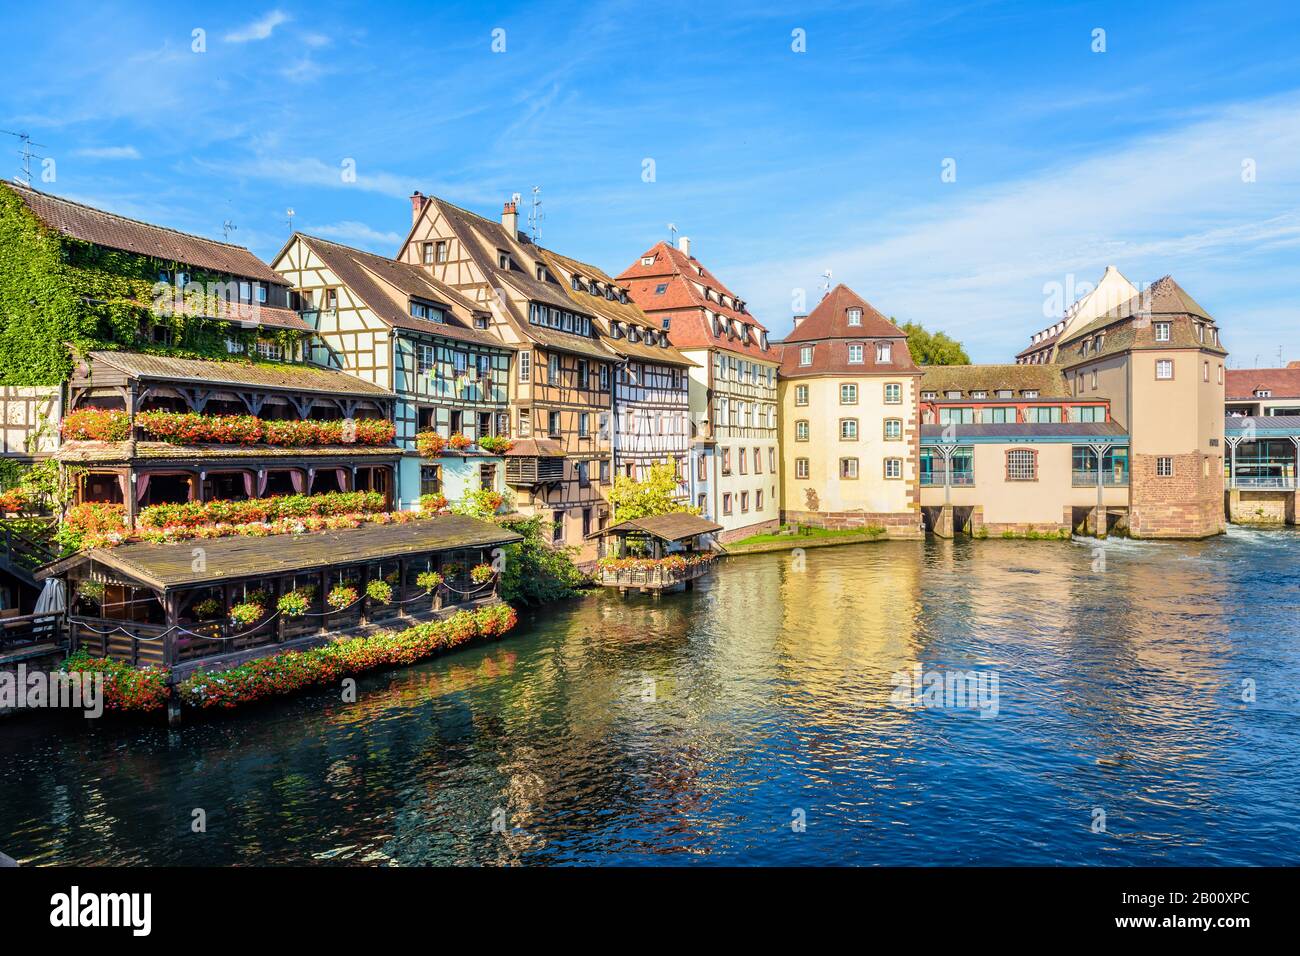 Half-timbered buildings and former water mills lining the river Ill in the Petite France quarter in Strasbourg, France, on a sunny morning. Stock Photo